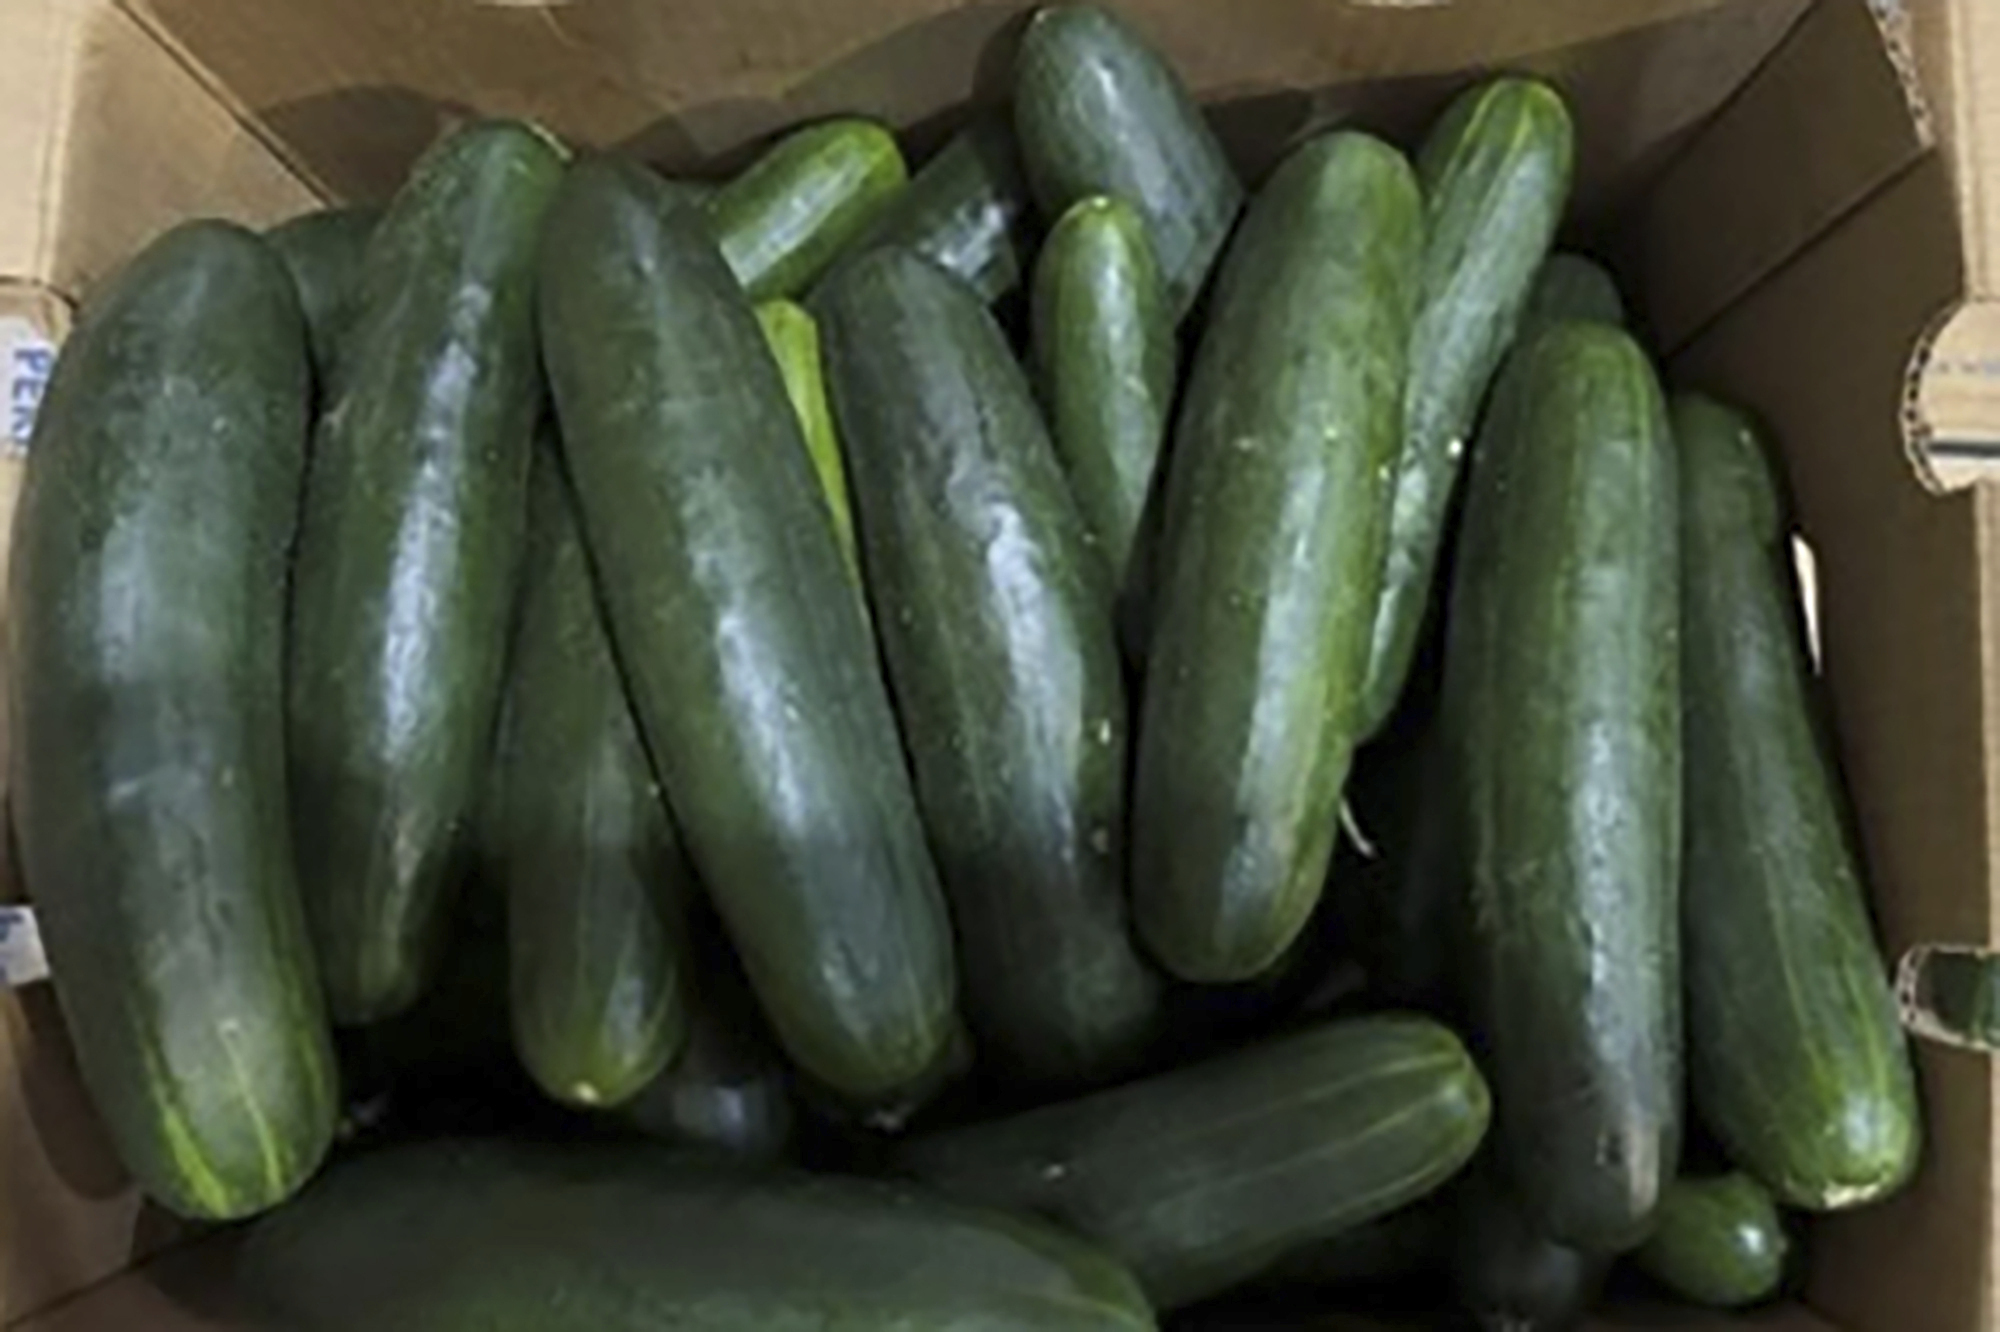 FILE - This undated photo provided by the U.S. Food and Drug Administration shows cucumbers in Florida recalled for salmonella. Untreated water used by Bedner Growers Inc. of Boynton Beach, Fla., is one likely source of salmonella food poisoning that sickened nearly 450 people across the U.S. this spring, federal health officials said Tuesday, July 2, 2024. (FDA via AP, File)